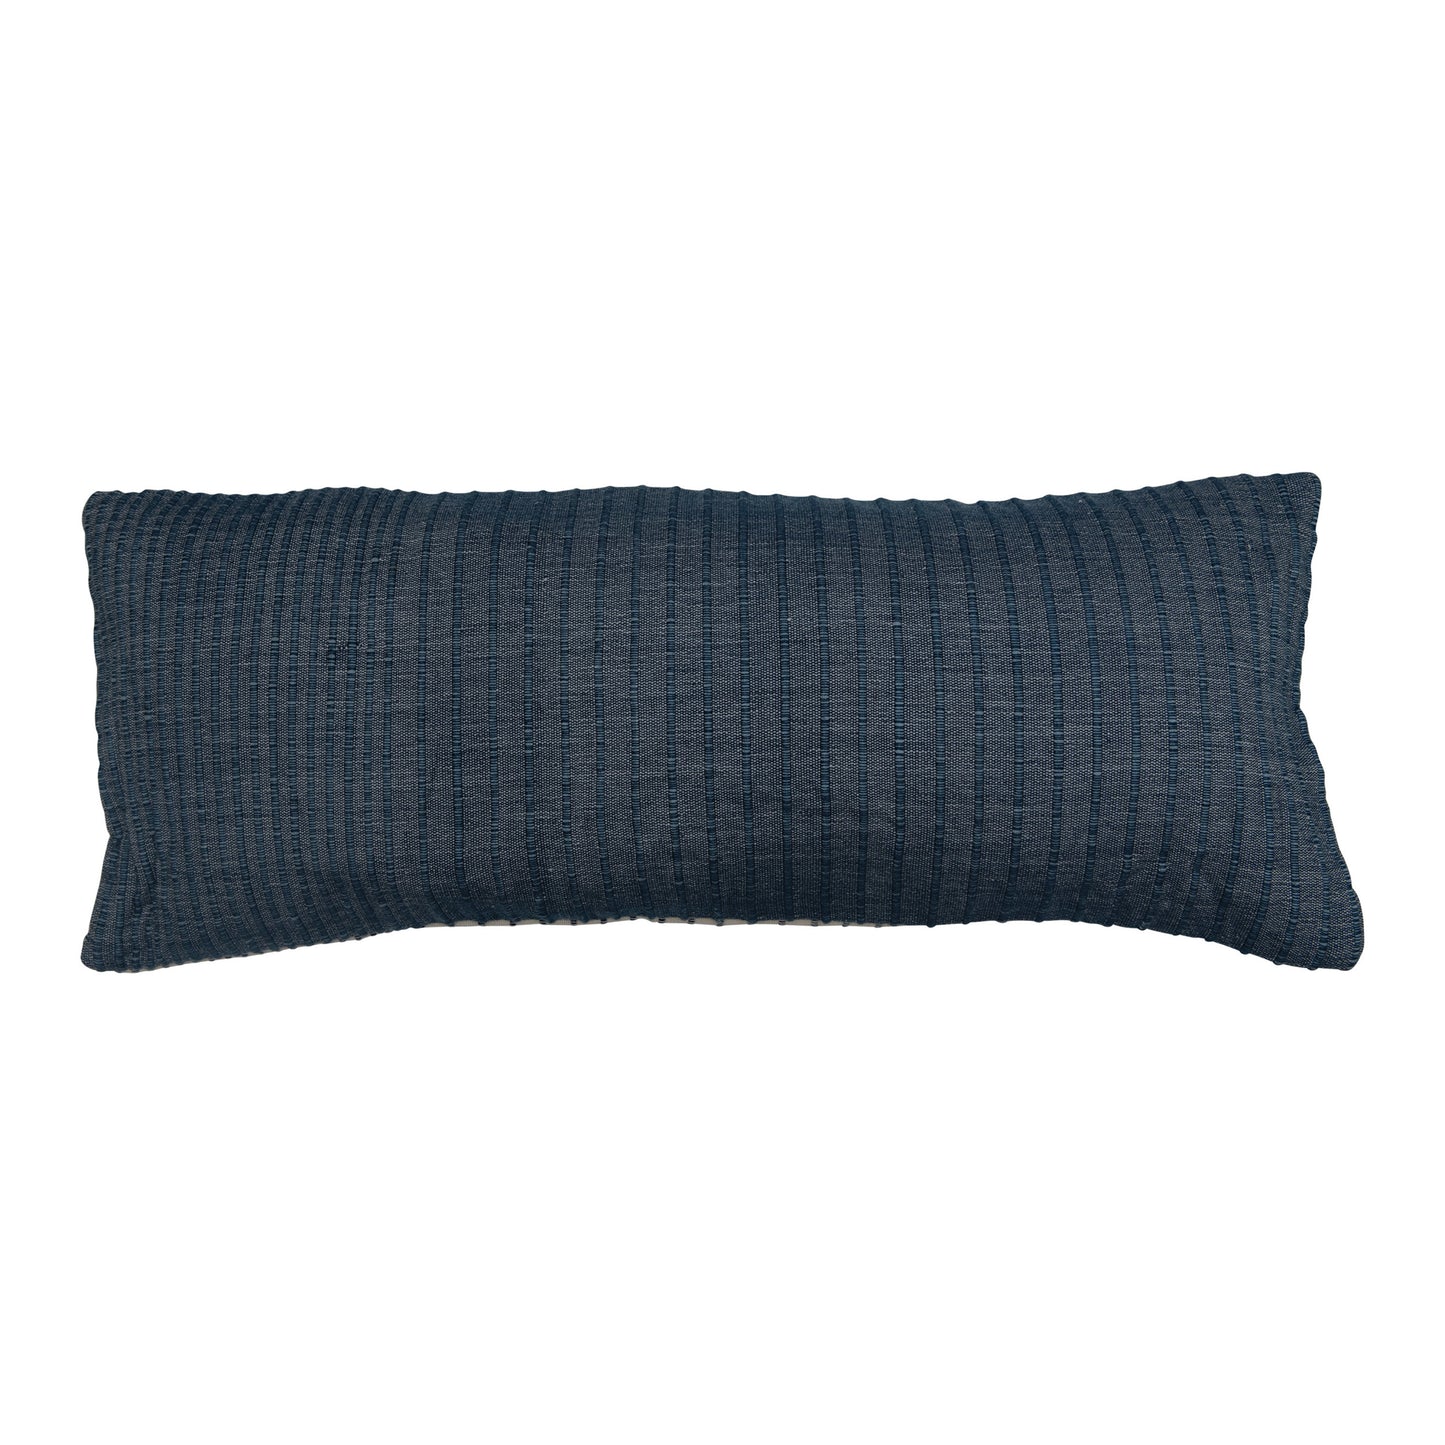 Woven Wool and Cotton Lumbar Pillow with Stripes